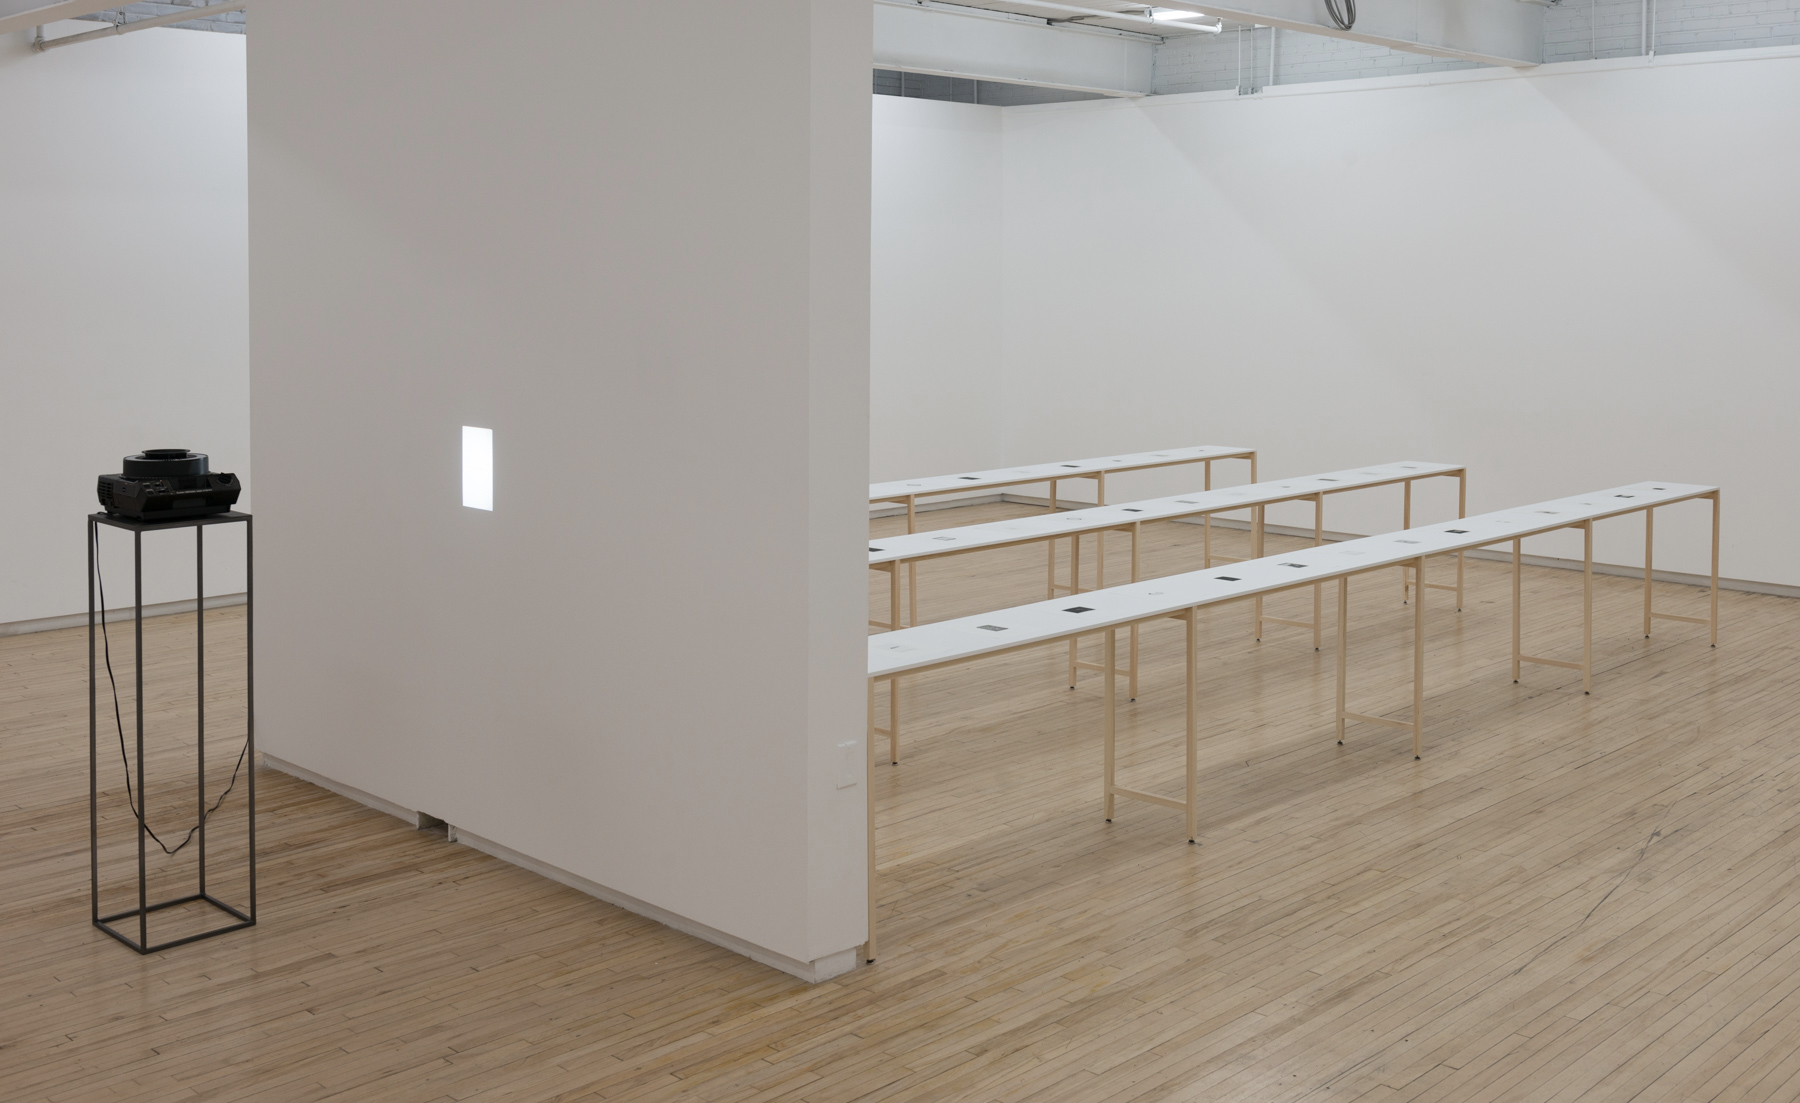 sophie-jodoin_installation-view-une-certaine-instabilite-emotionnelle_april-15-may-30_battat-contemporary-montreal-photo-paul-litherland_courtesy-battat-contemporary-03 (1)